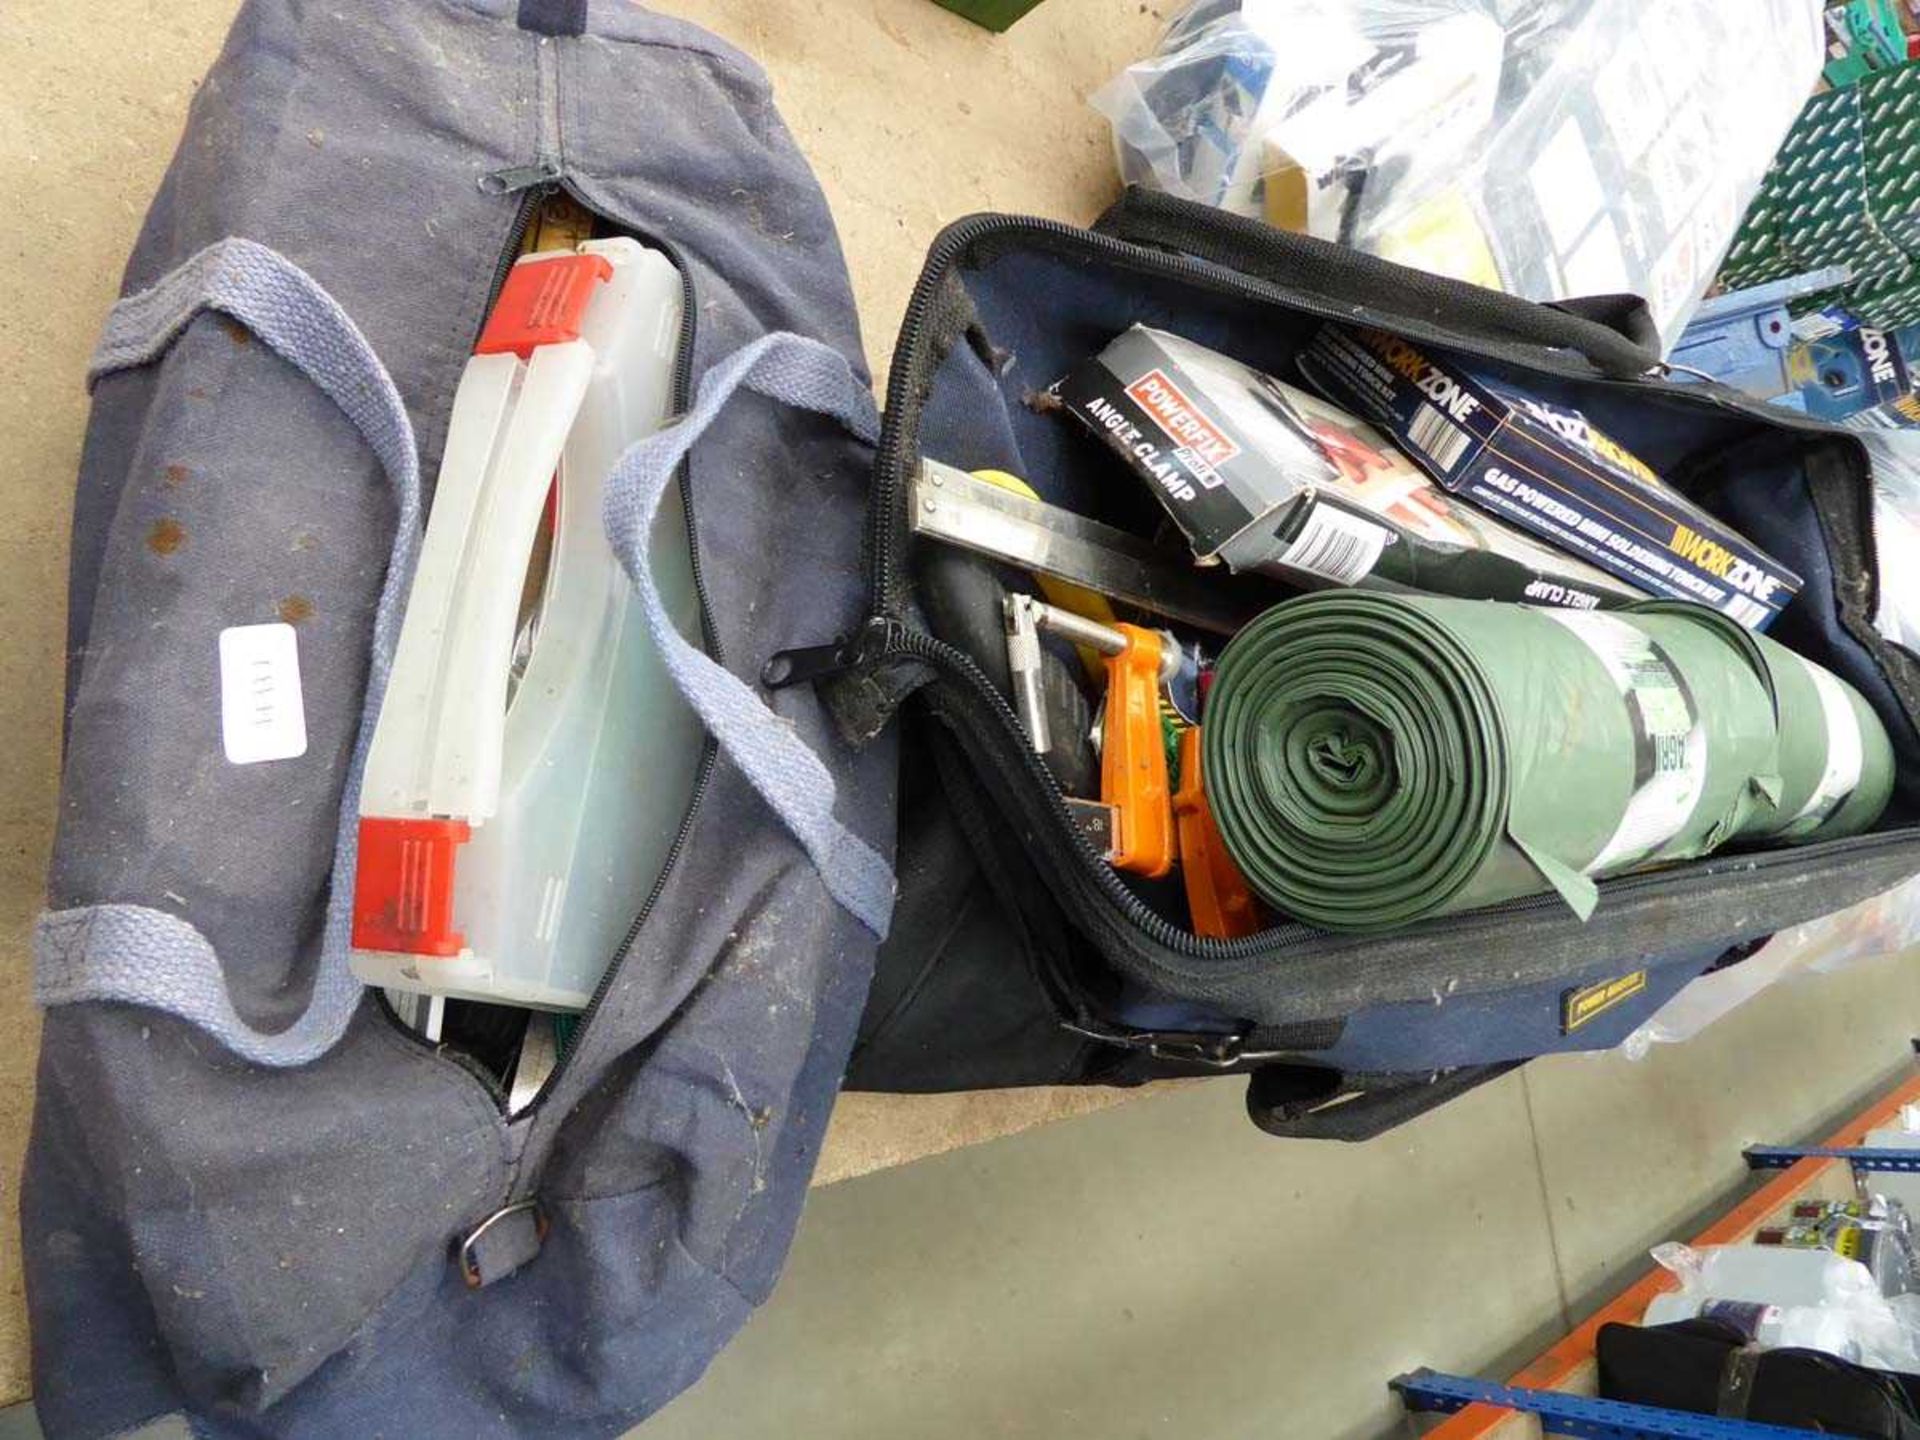 2 toolbags containing large quantity of assorted small tools inc. soldering kits, drill bit sets, - Image 2 of 2